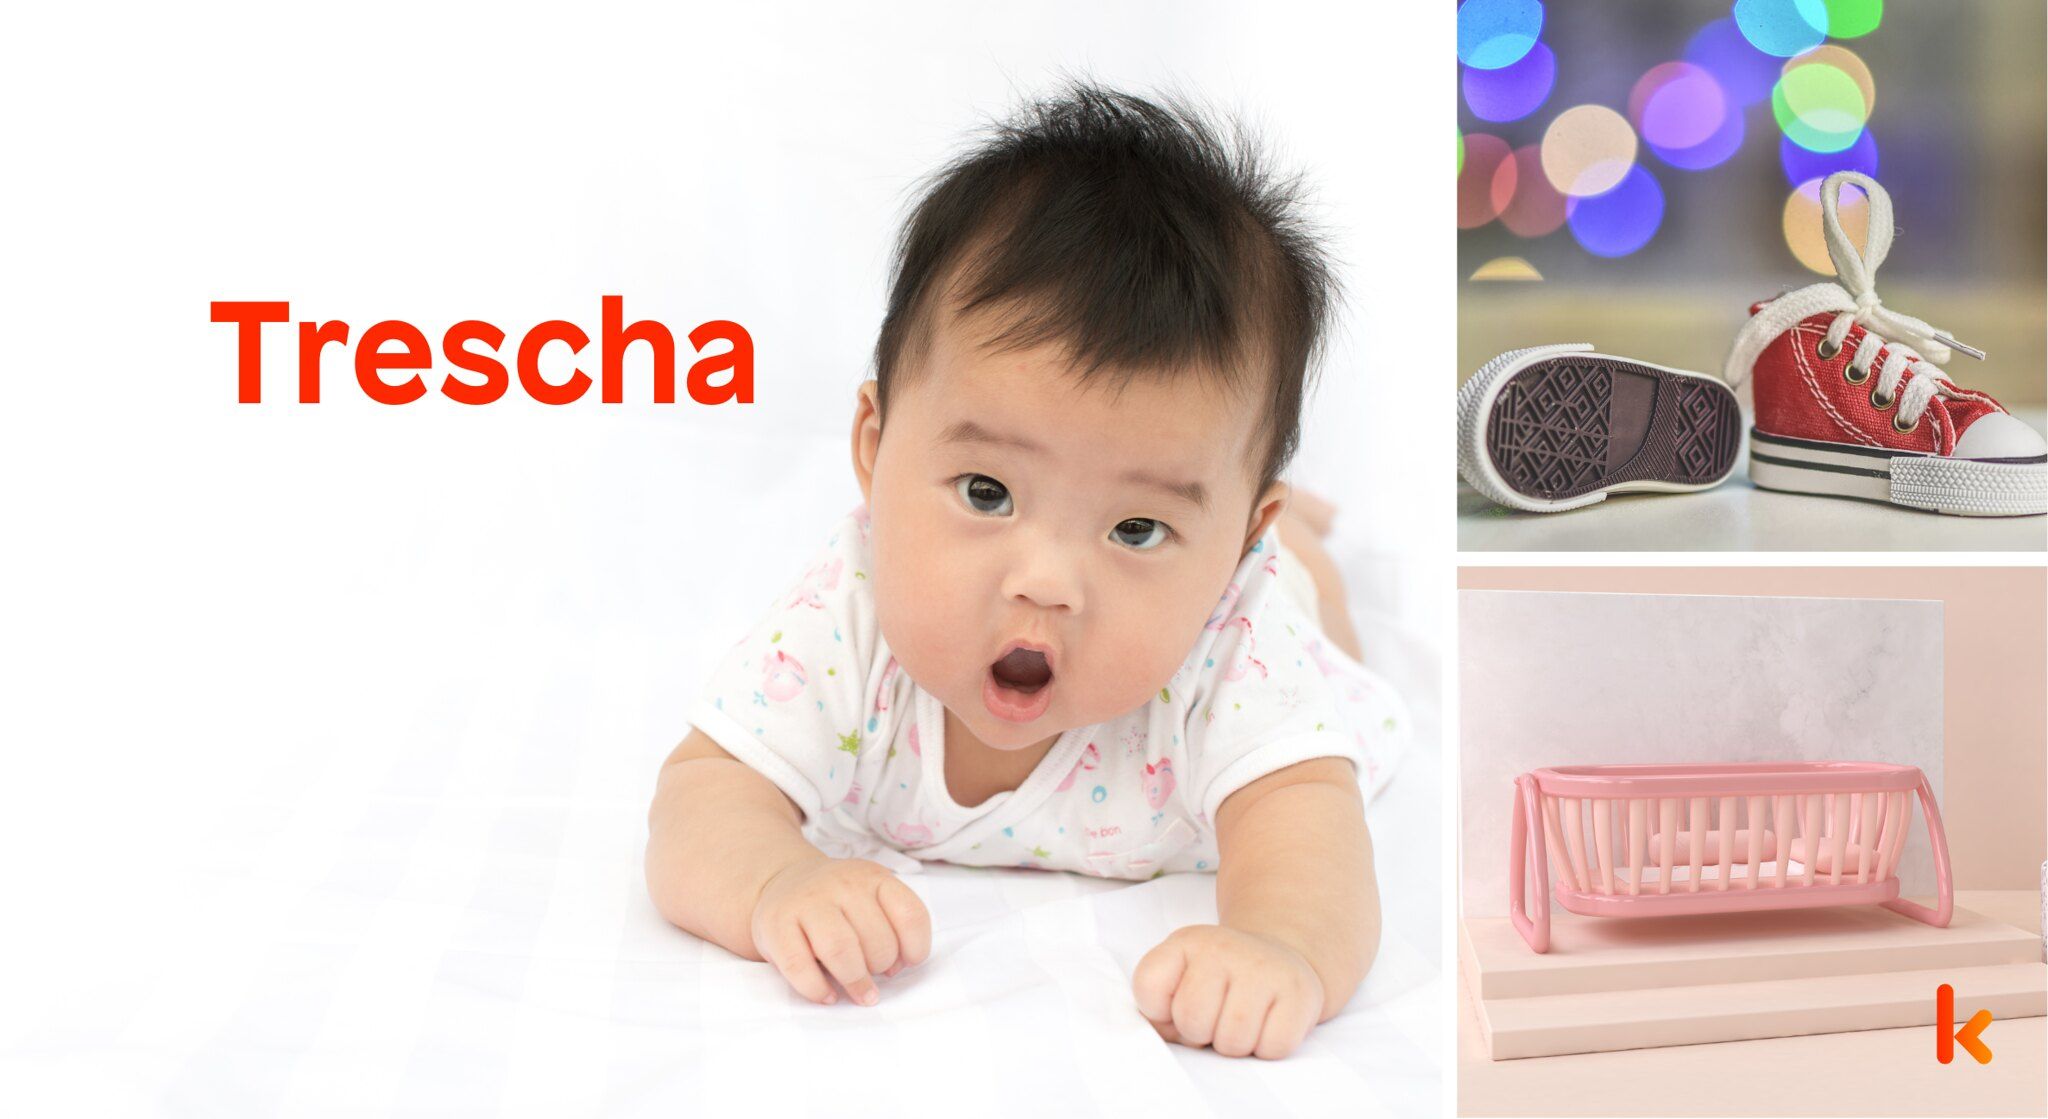 Meaning of the name Trescha